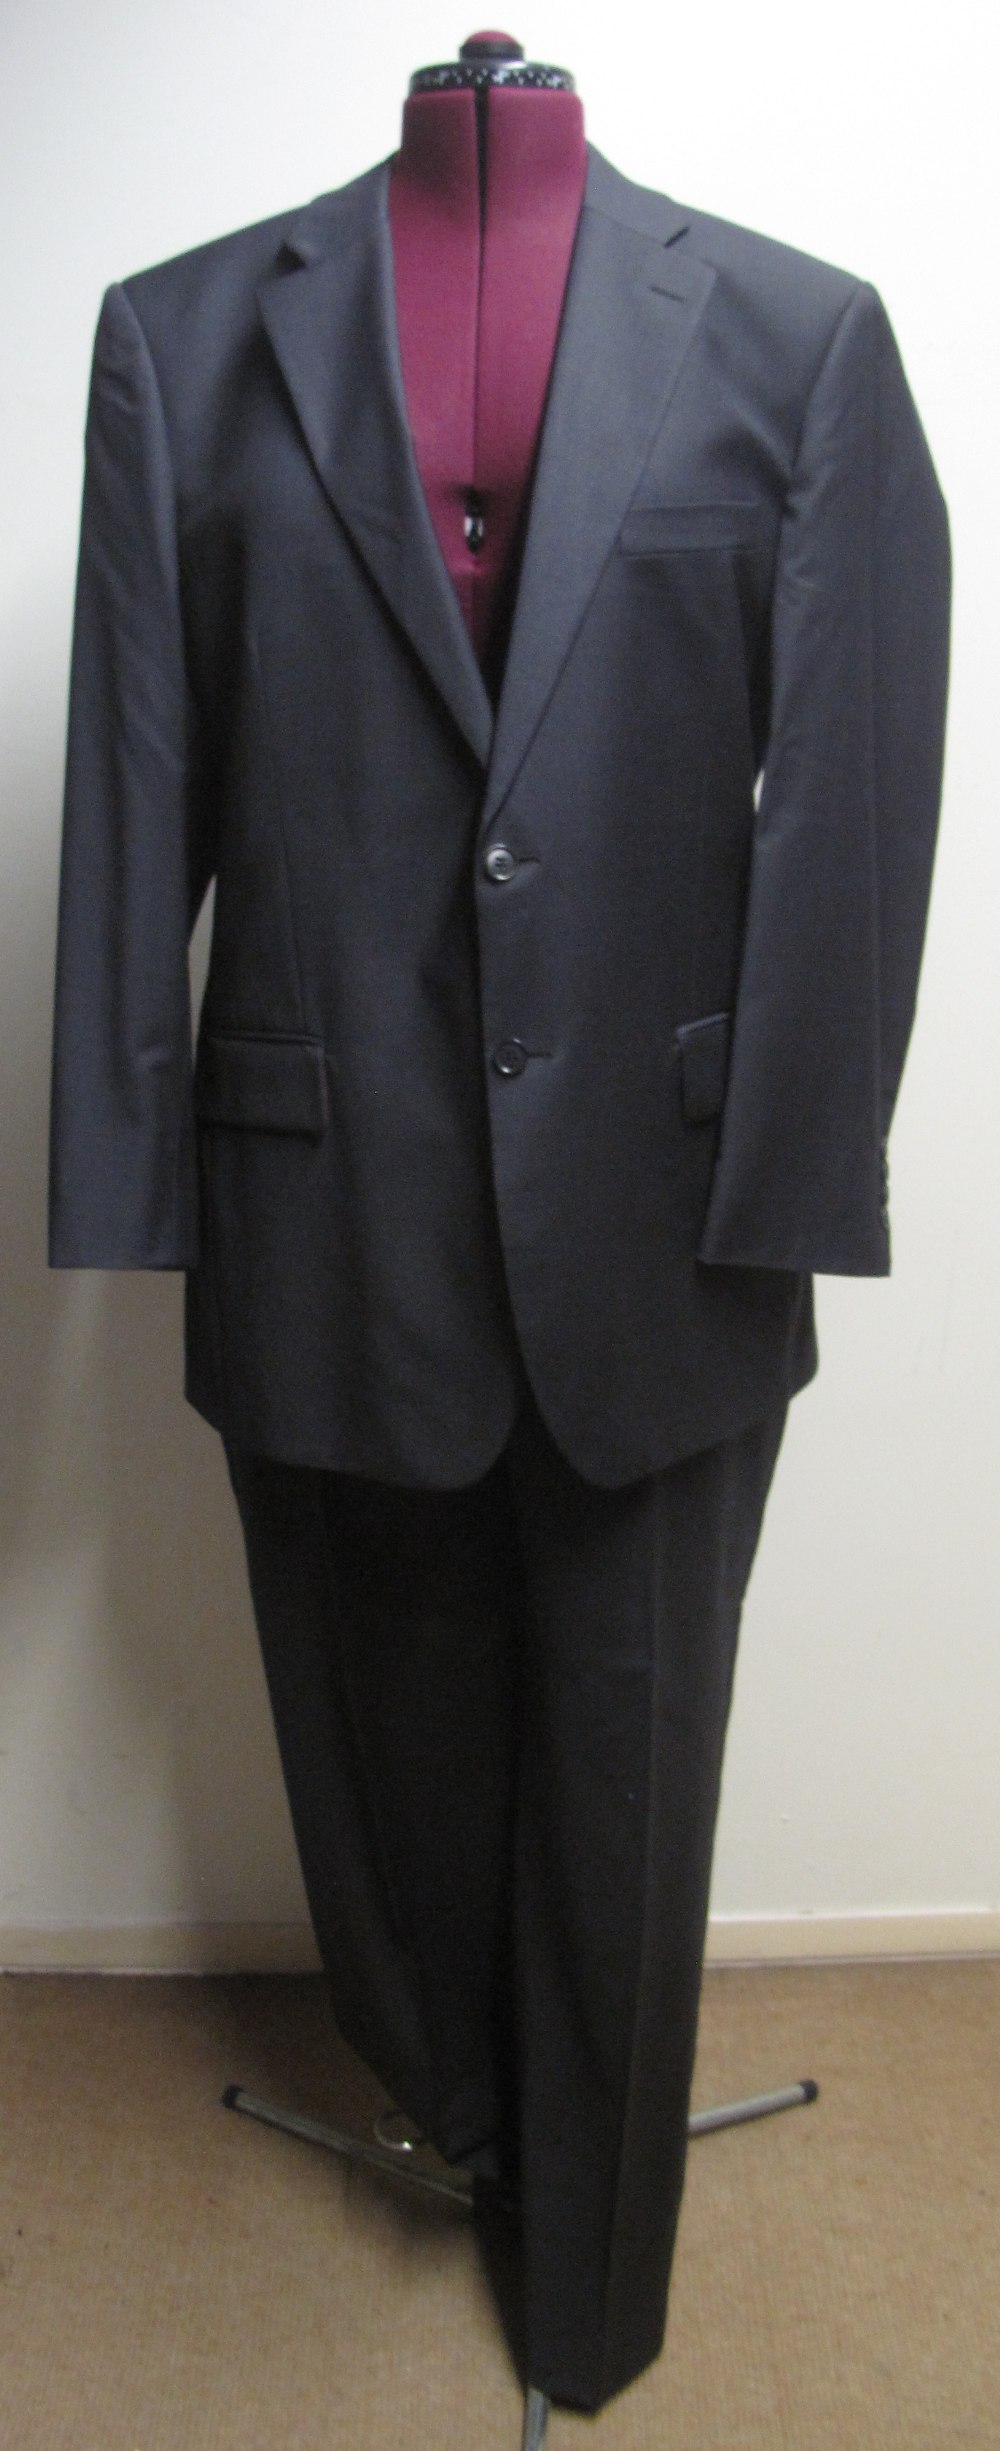 Six designer fine wool men's suits to include; a grey striped suit by Hugo Boss, - Image 3 of 9